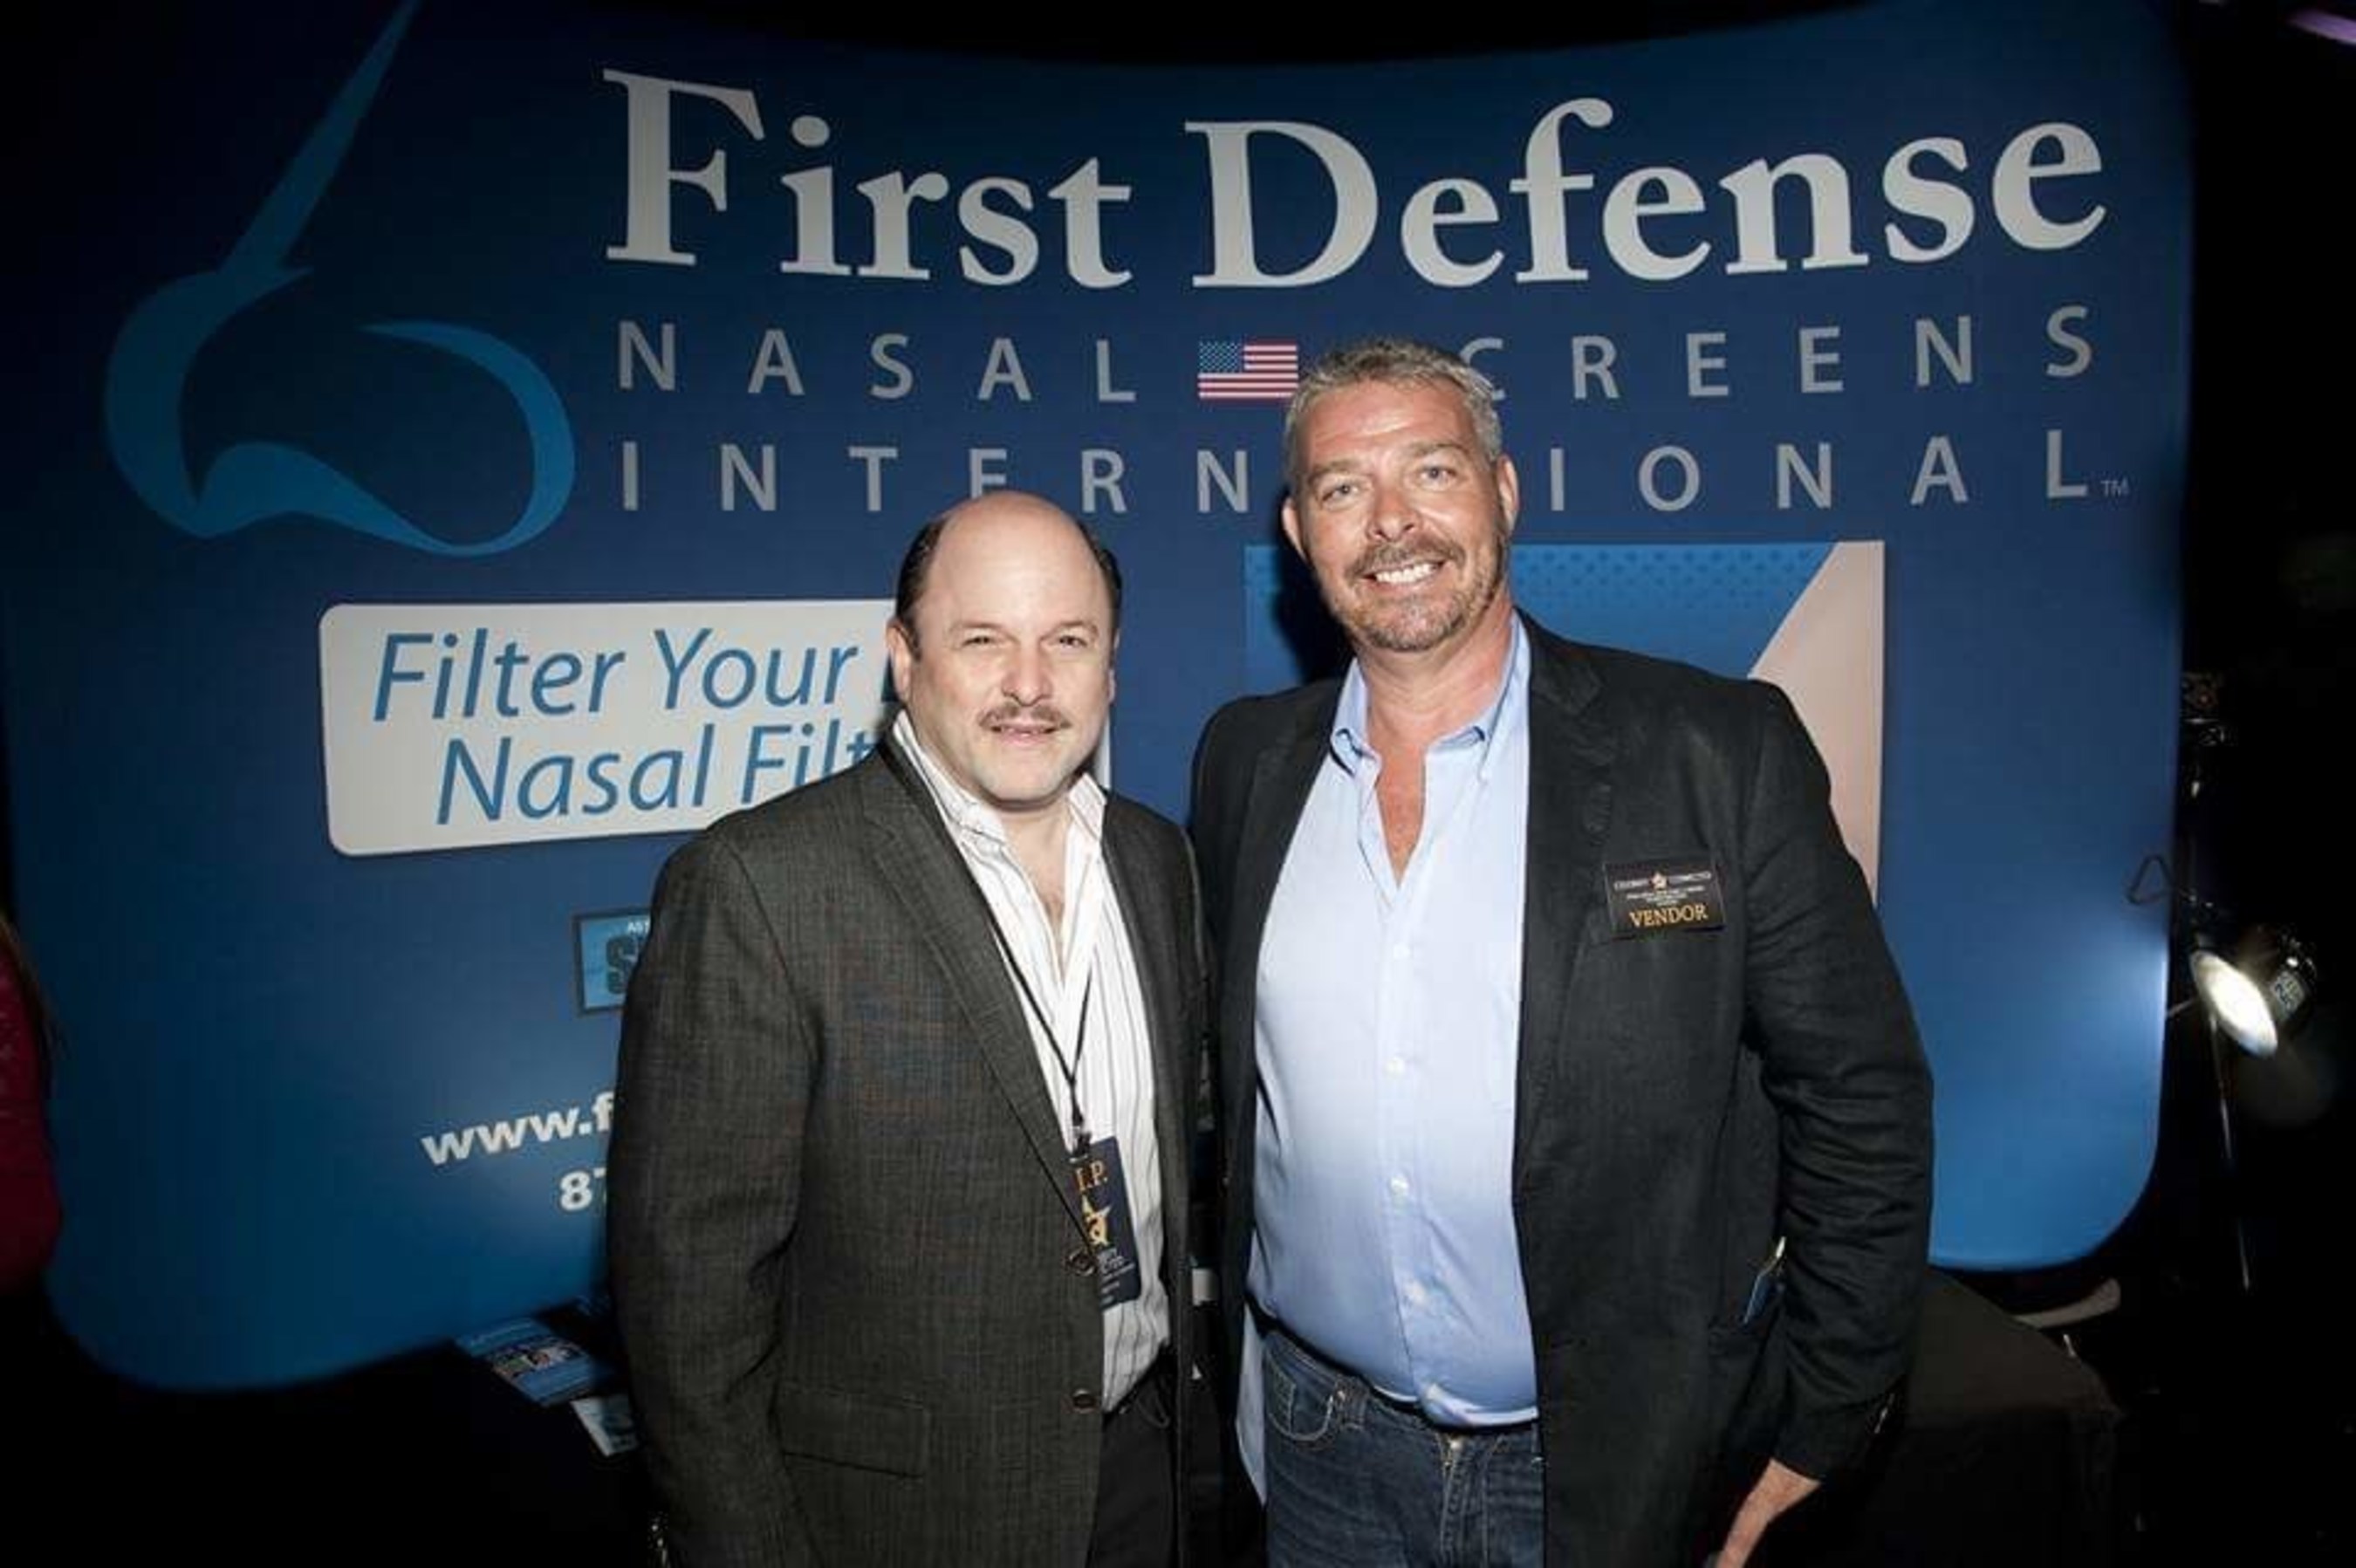 First Defense Nasal Screens Net Worth Man Who Turned Down Shark Tank S 4m Offer Kicks Off 40 Country Wide Distribution With A Purchase Order For 8m Of His First Defense Nasal Screens For The Nose Will Debut At Consumer